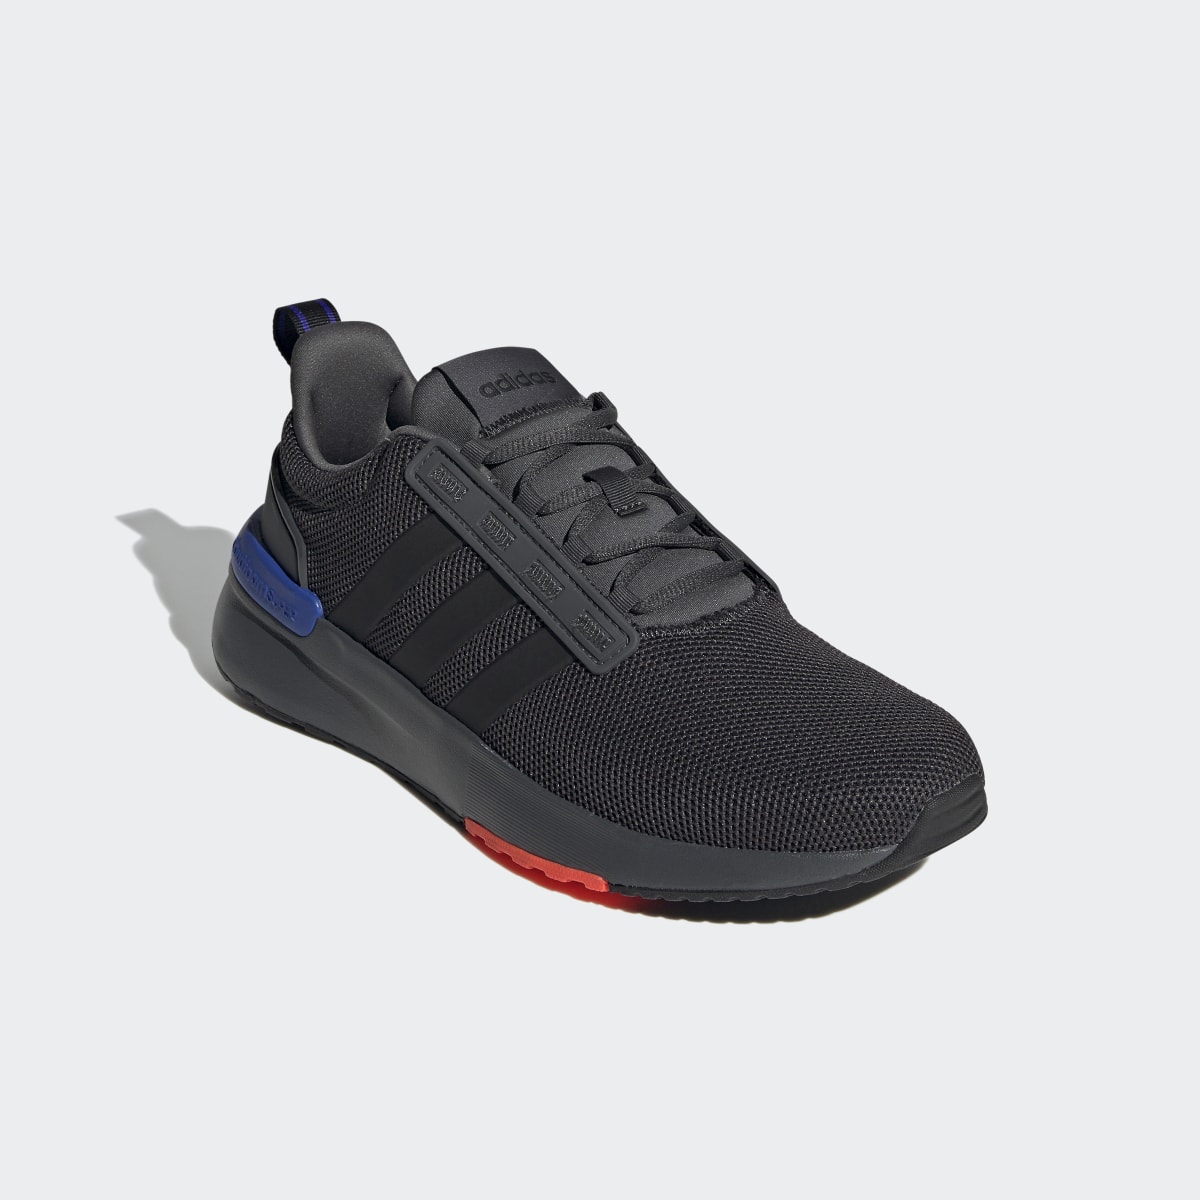 Adidas Racer TR21 Shoes. 5